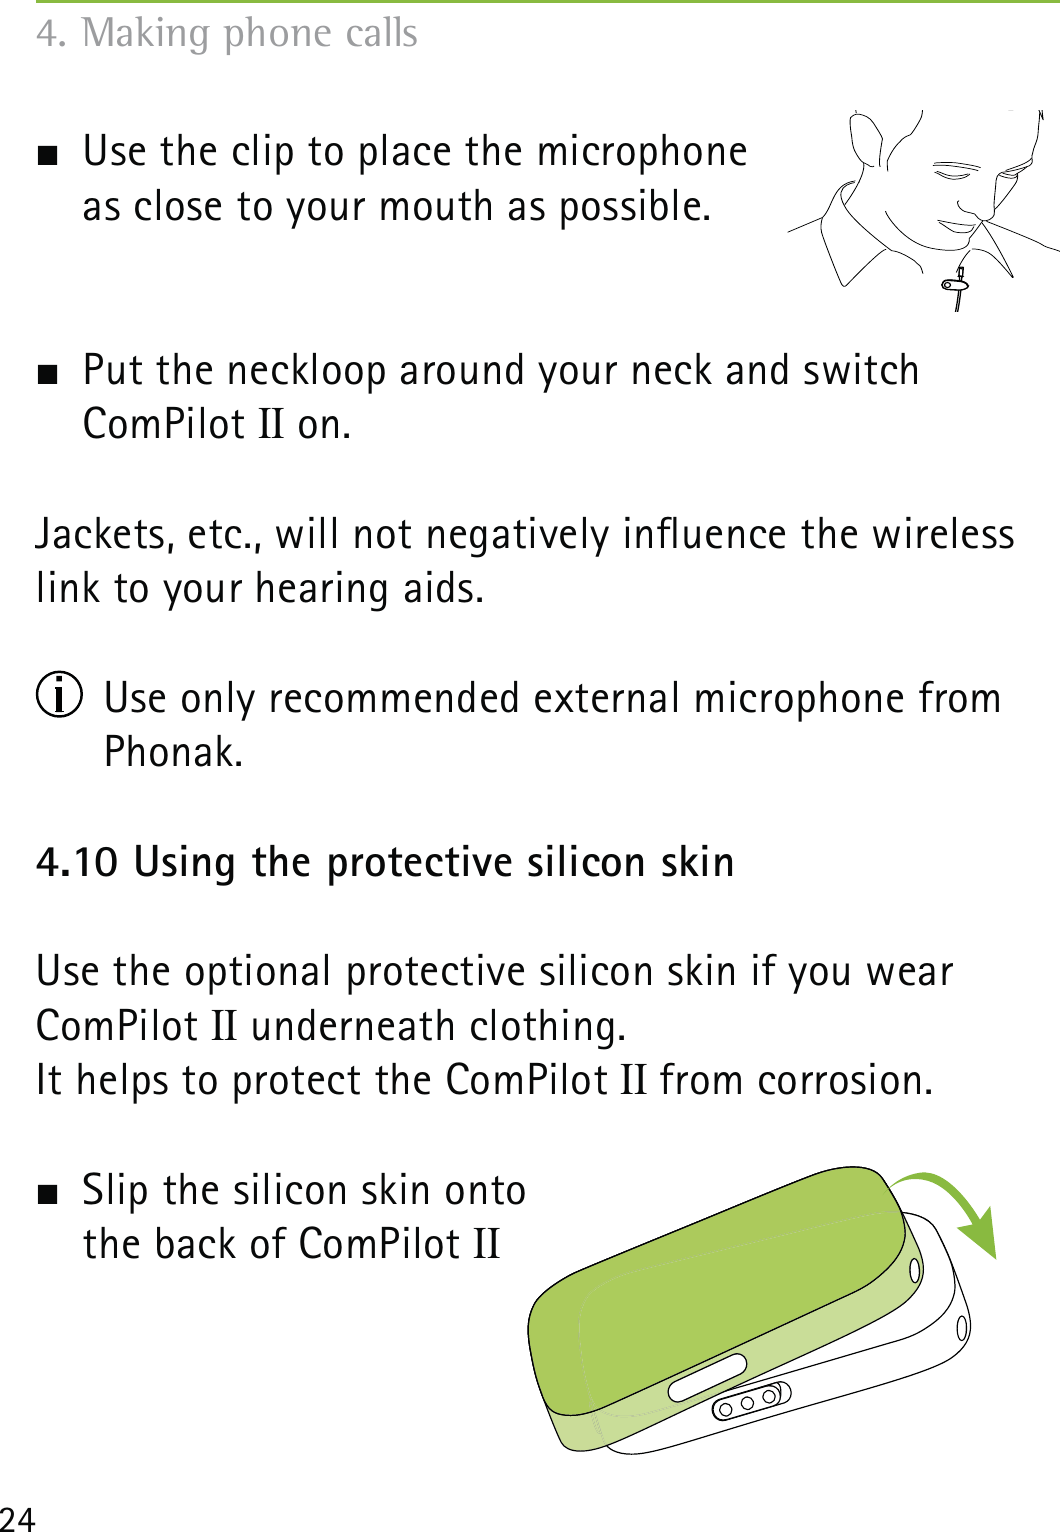 24  Use the clip to place the microphone  as close to your mouth as possible.   Put the neckloop around your neck and switch  ComPilot II on.Jackets, etc., will not negatively inuence the wireless link to your hearing aids.  Use only recommended external microphone from Phonak. 4.10 Using the protective silicon skinUse the optional protective silicon skin if you wear ComPilot II underneath clothing.It helps to protect the ComPilot II from corrosion.  Slip the silicon skin onto  the back of ComPilot II 4. Making phone calls